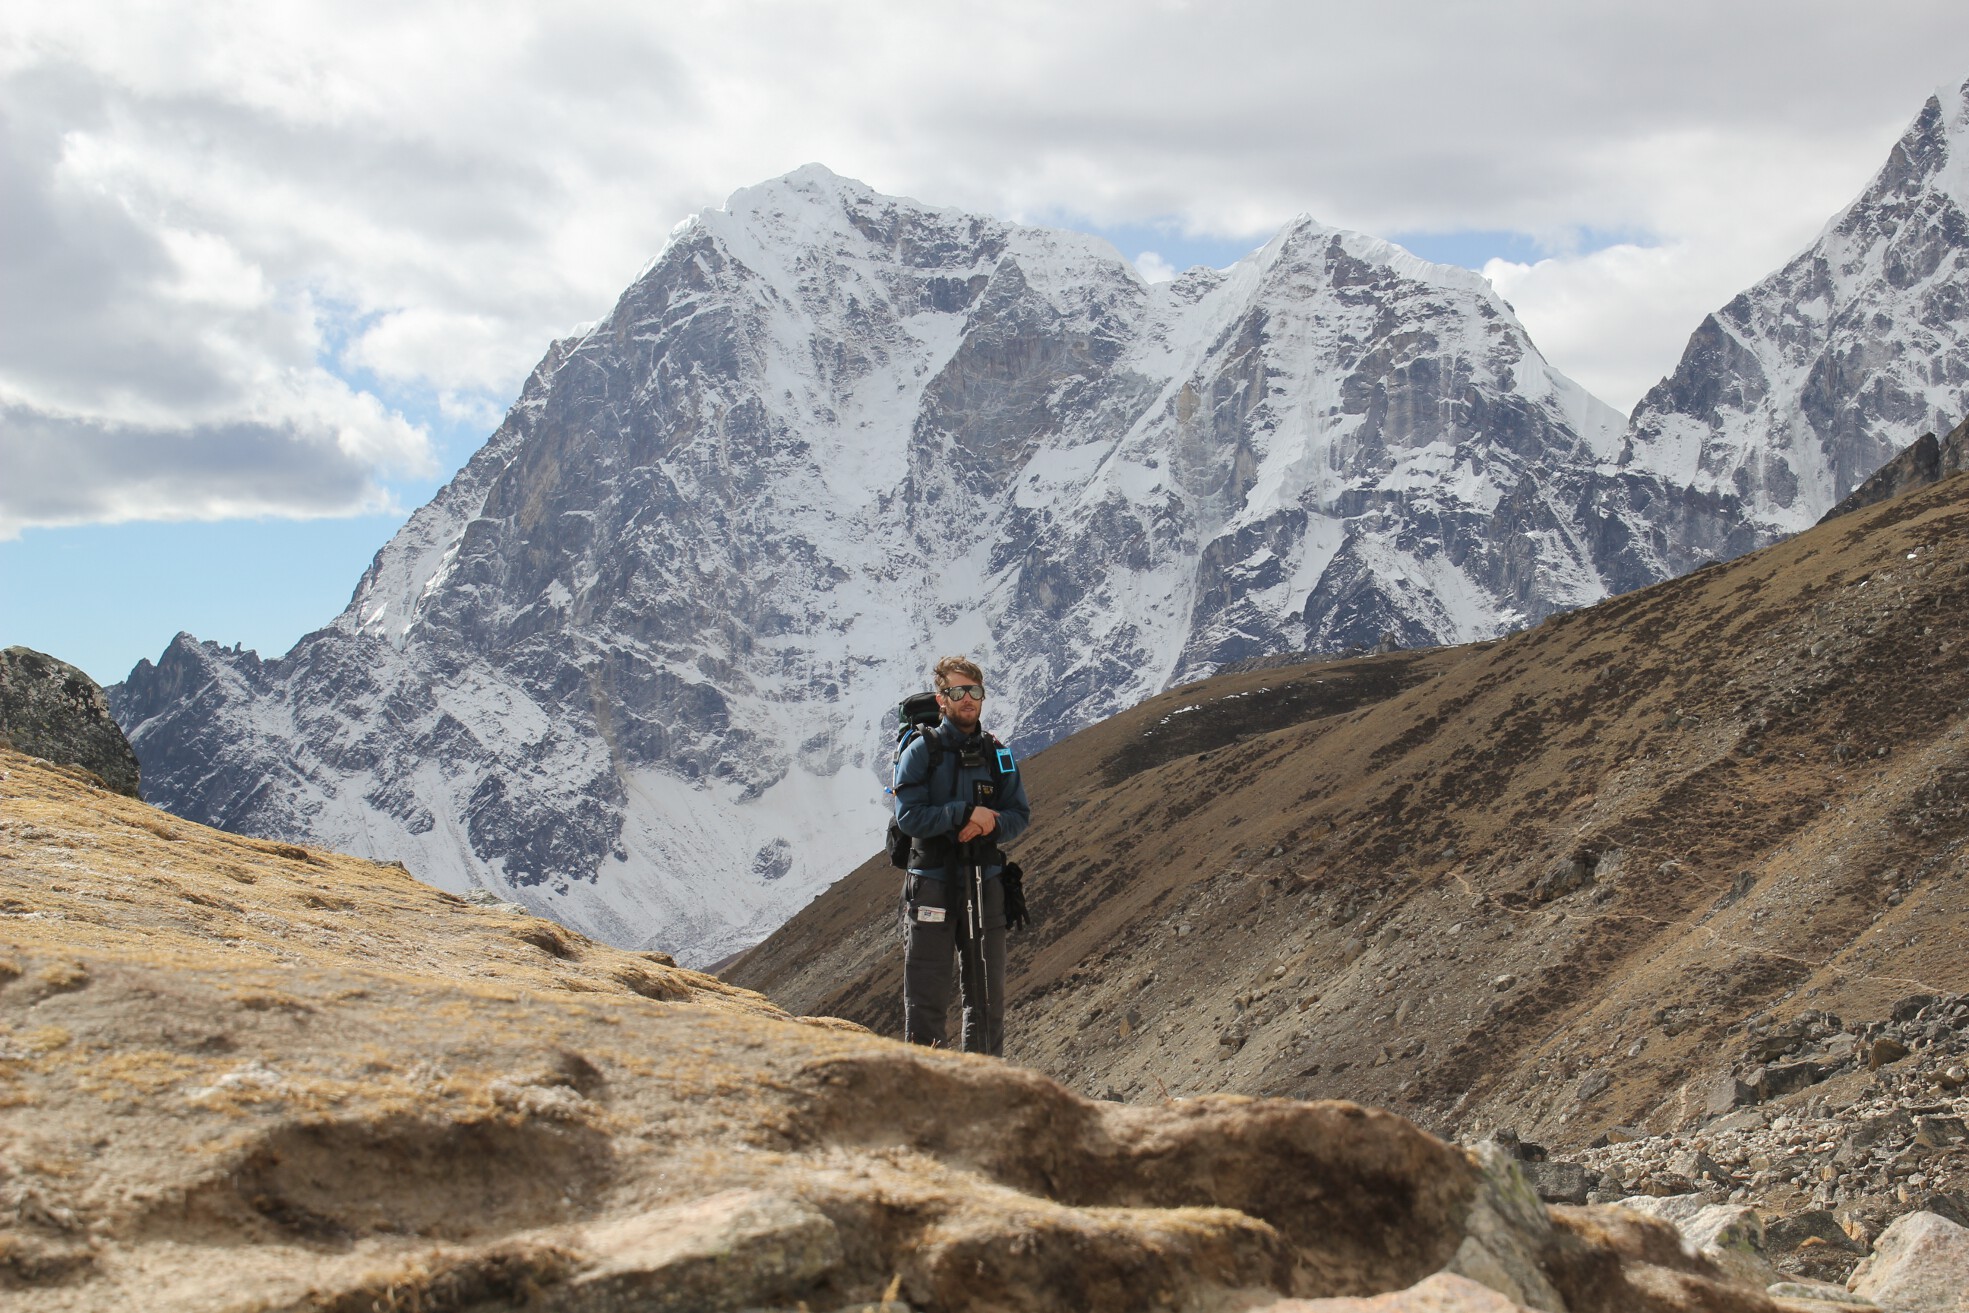 Brian hikes with a Lumix DSC-T2 attached to his chest near Everest Base Camp, Nepal.